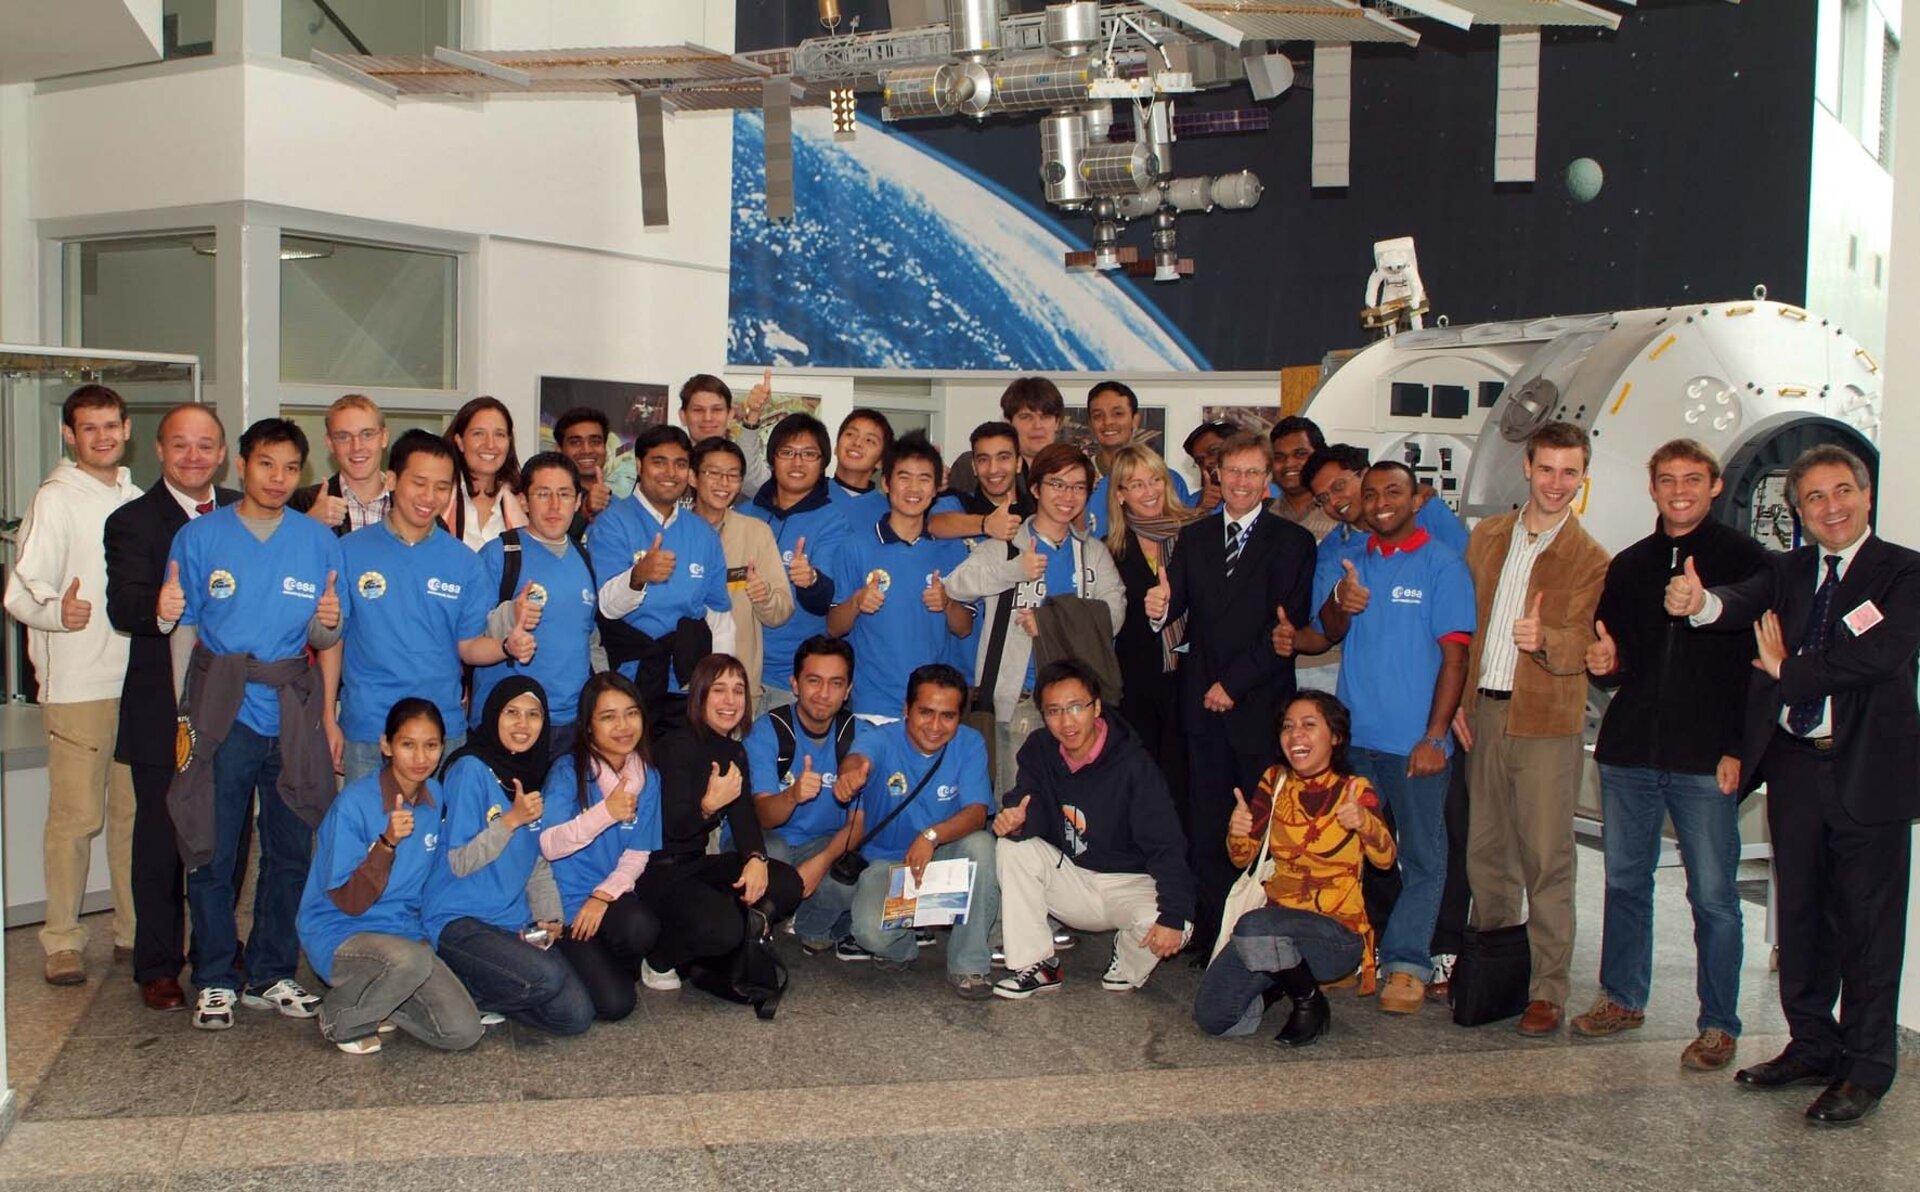 Group photo in the foyer of the German Space Operations Center (GSOC)